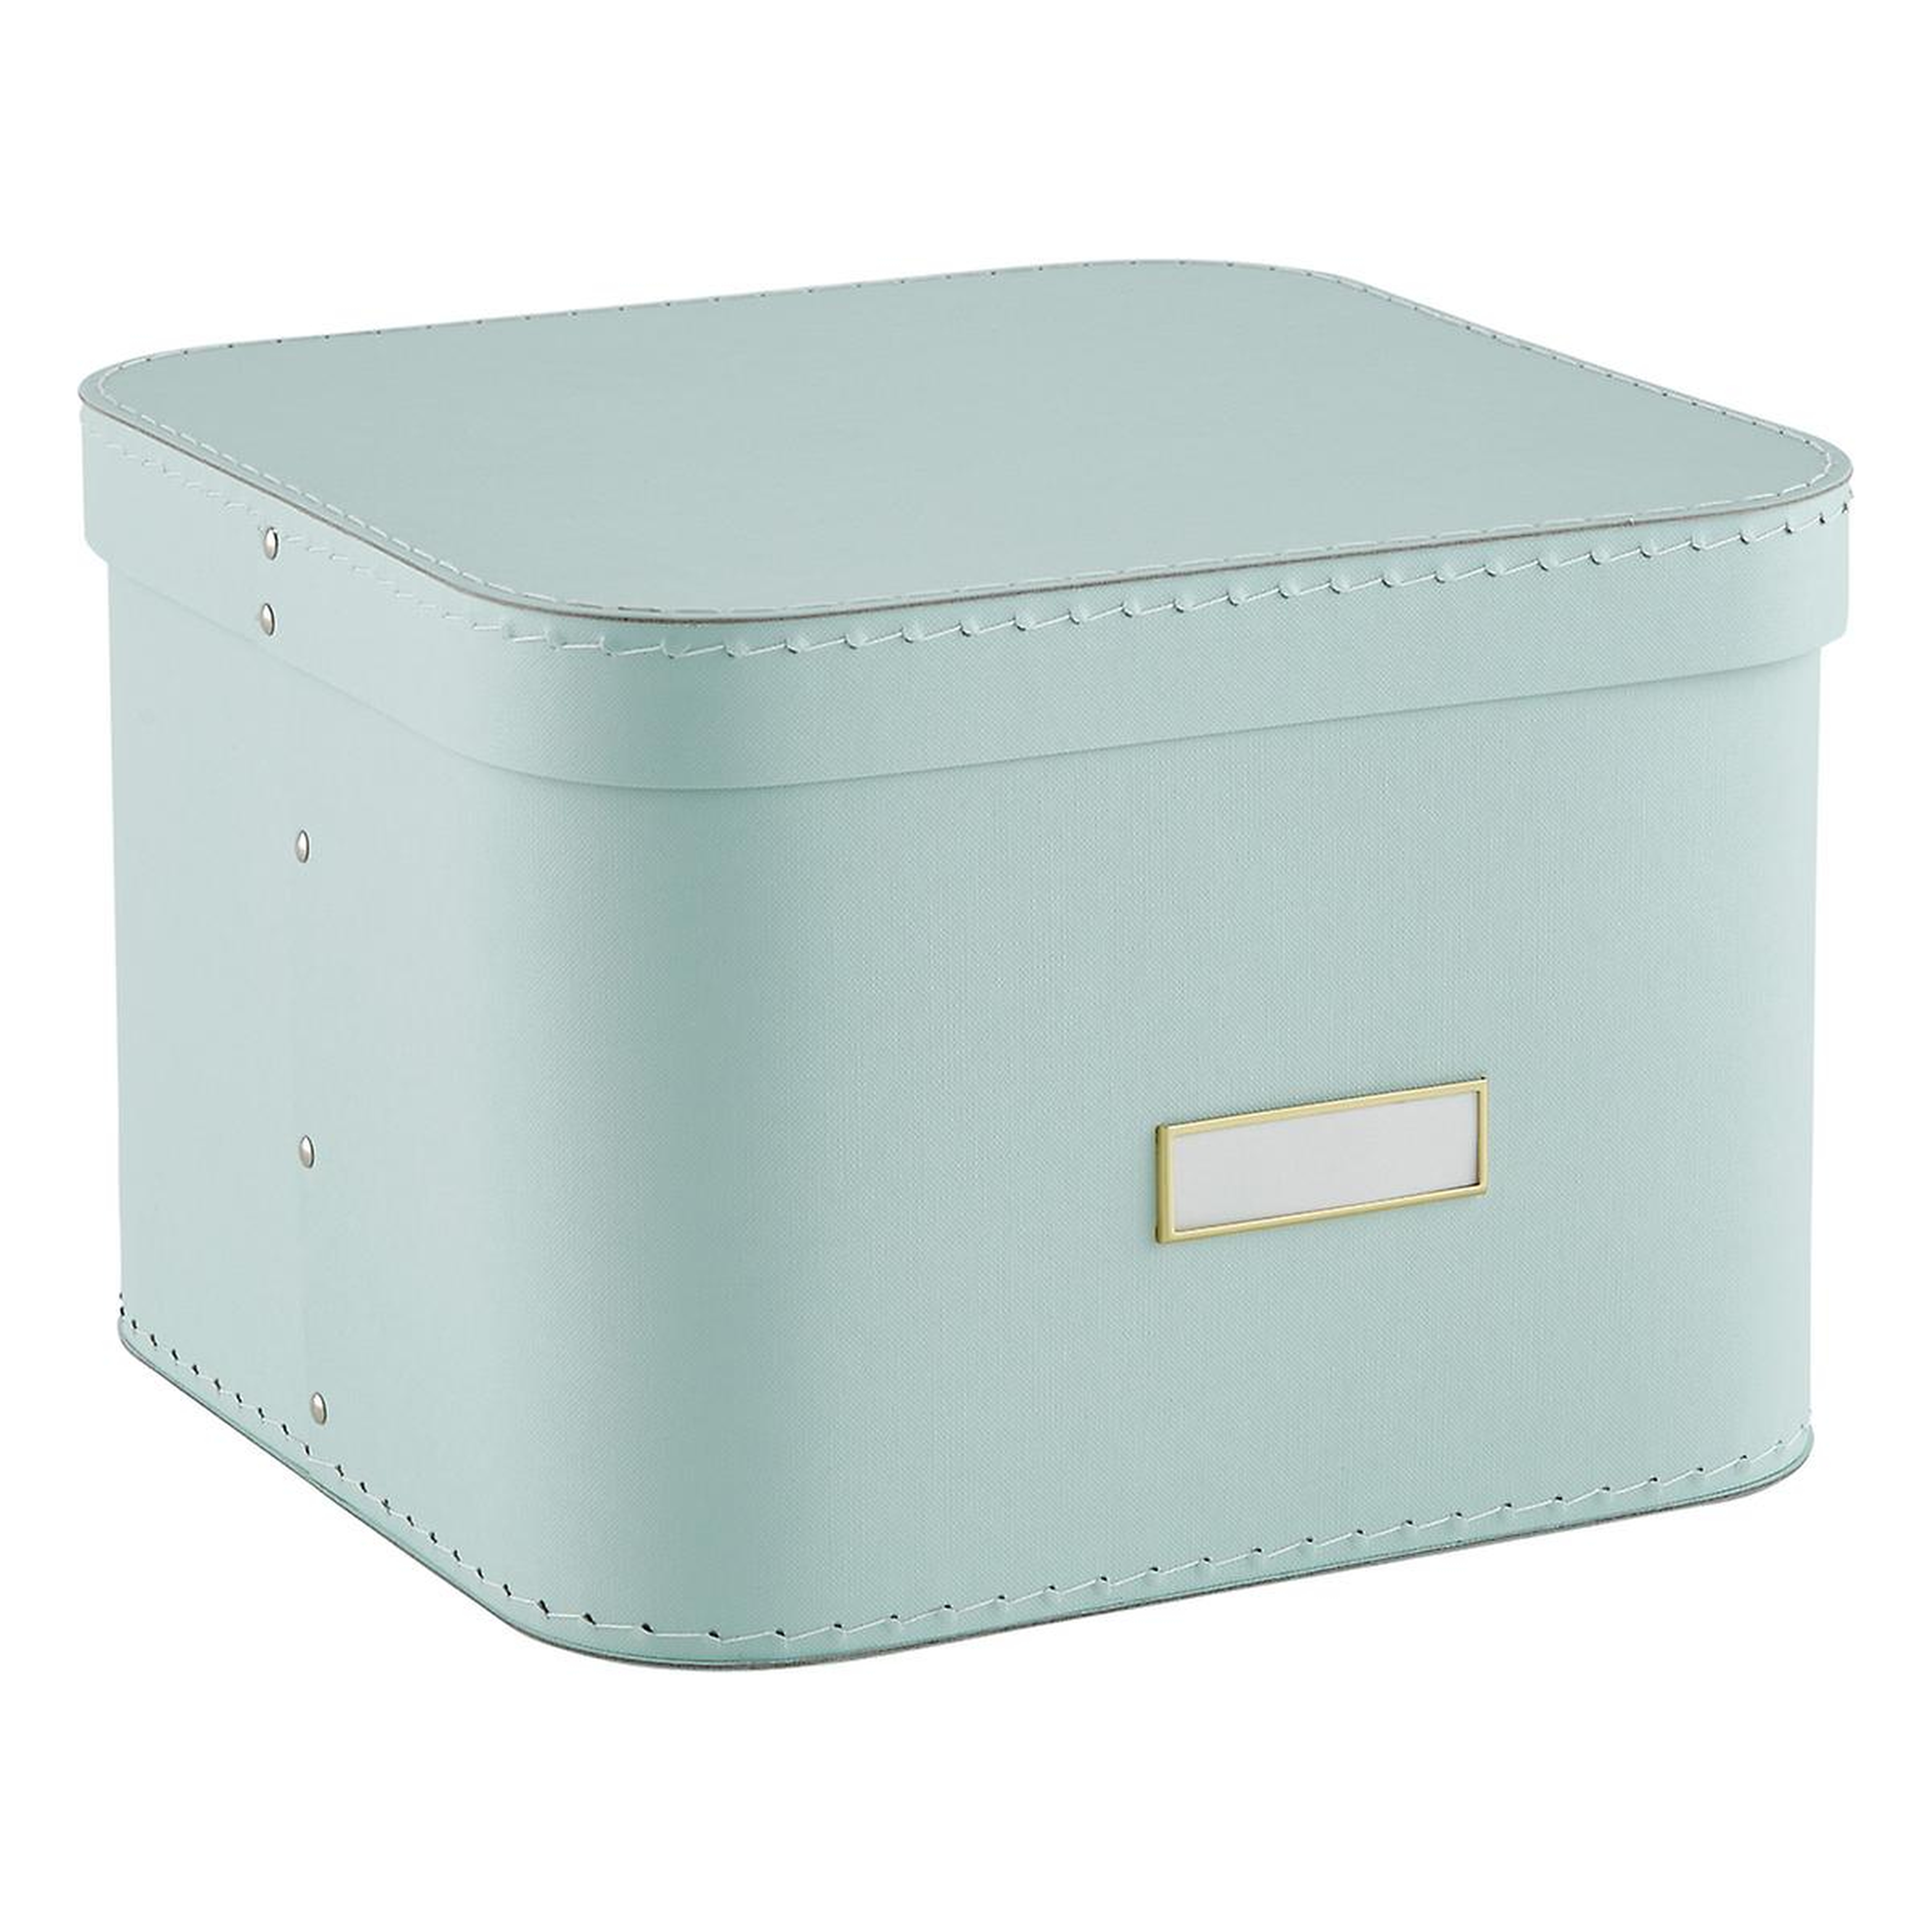 Mint Oskar Storage Box with Lid - containerstore.com